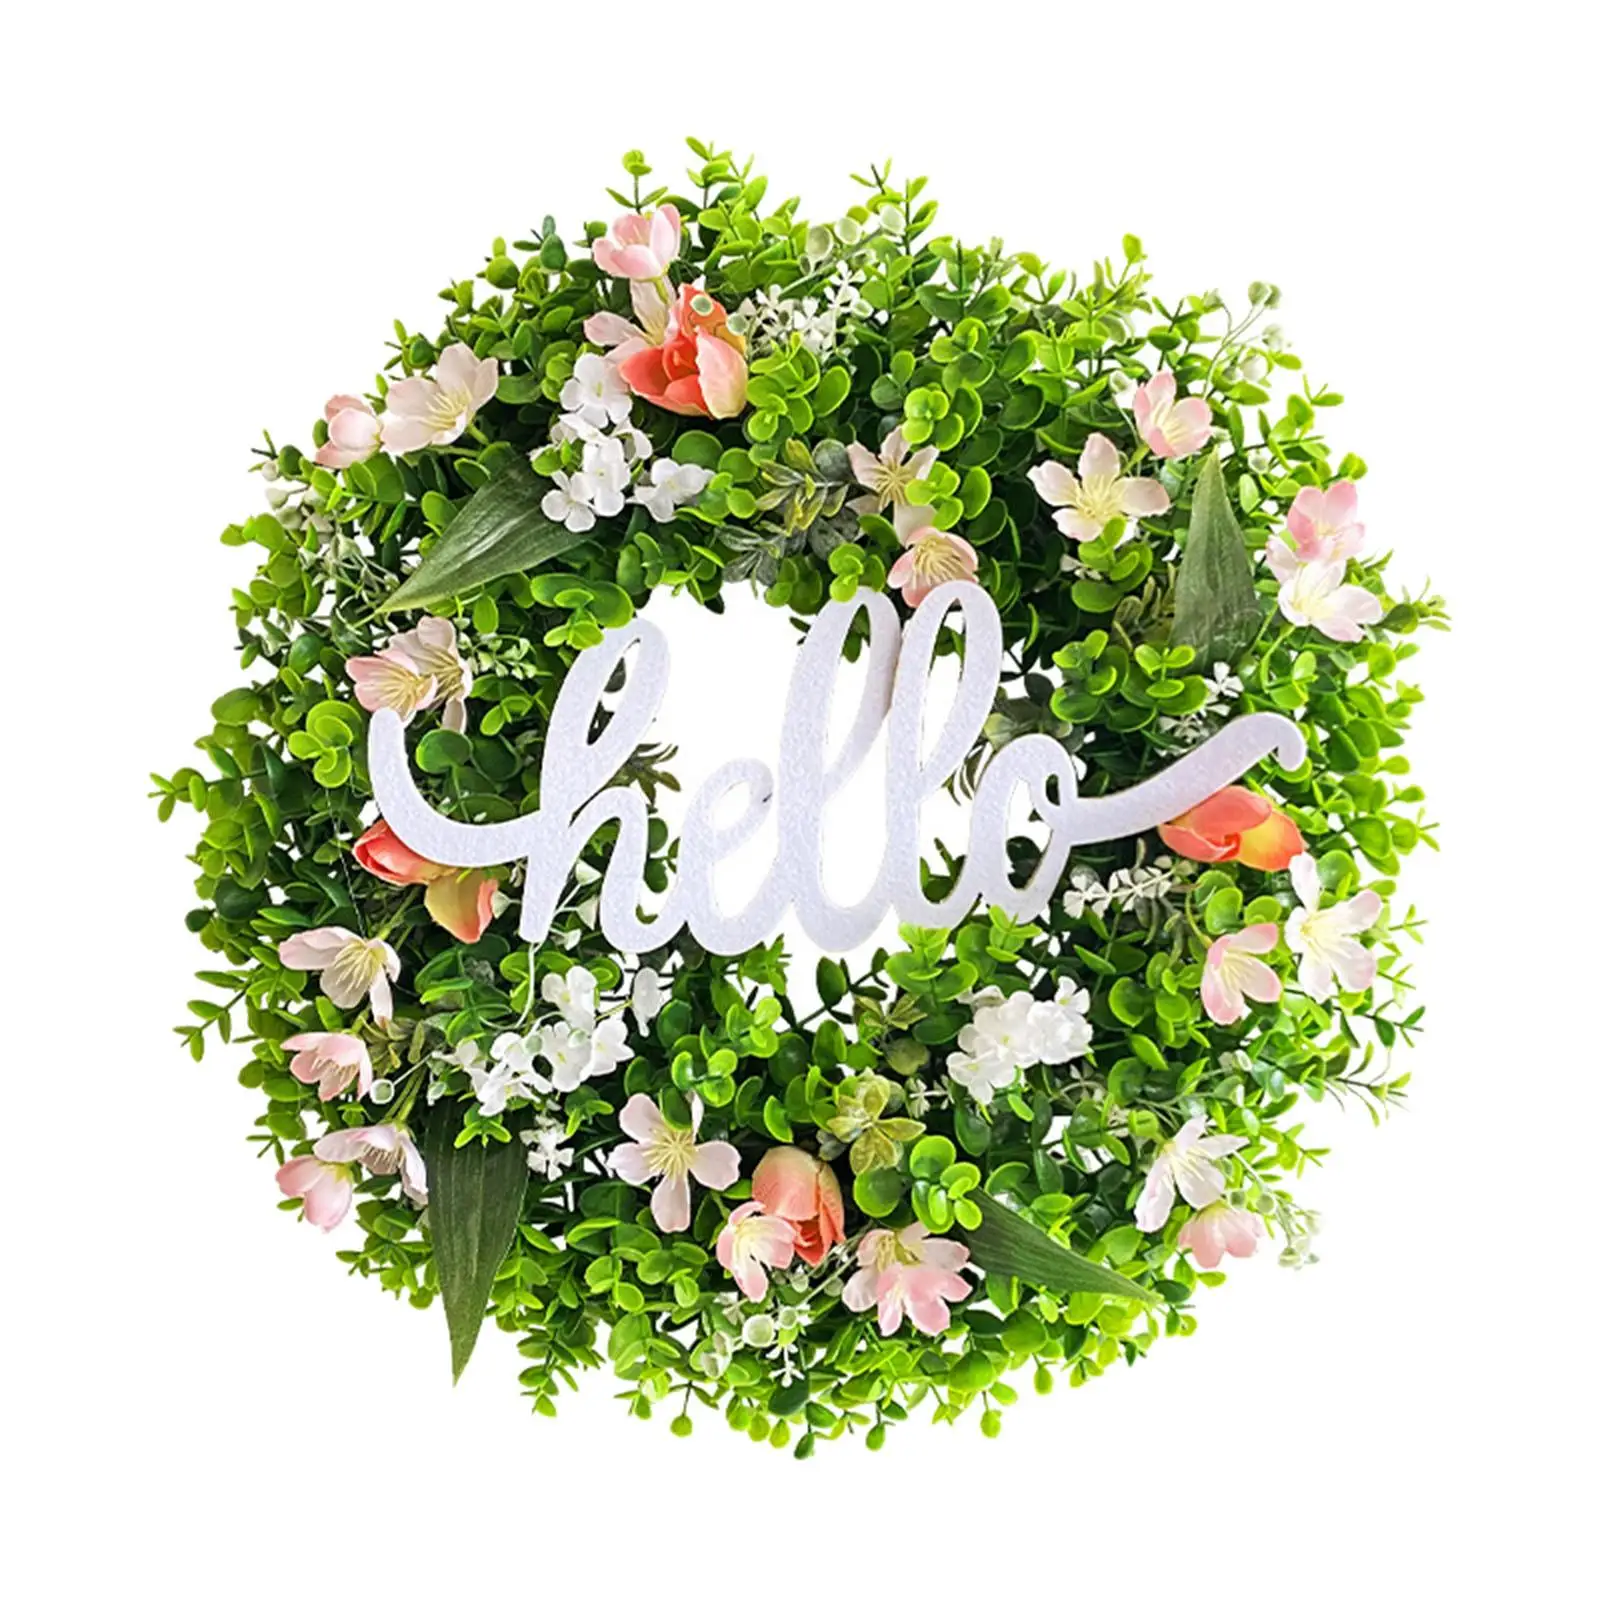 Spring Wreath Artificial Flower Wreath Greenery Leaves Wreath for Holiday